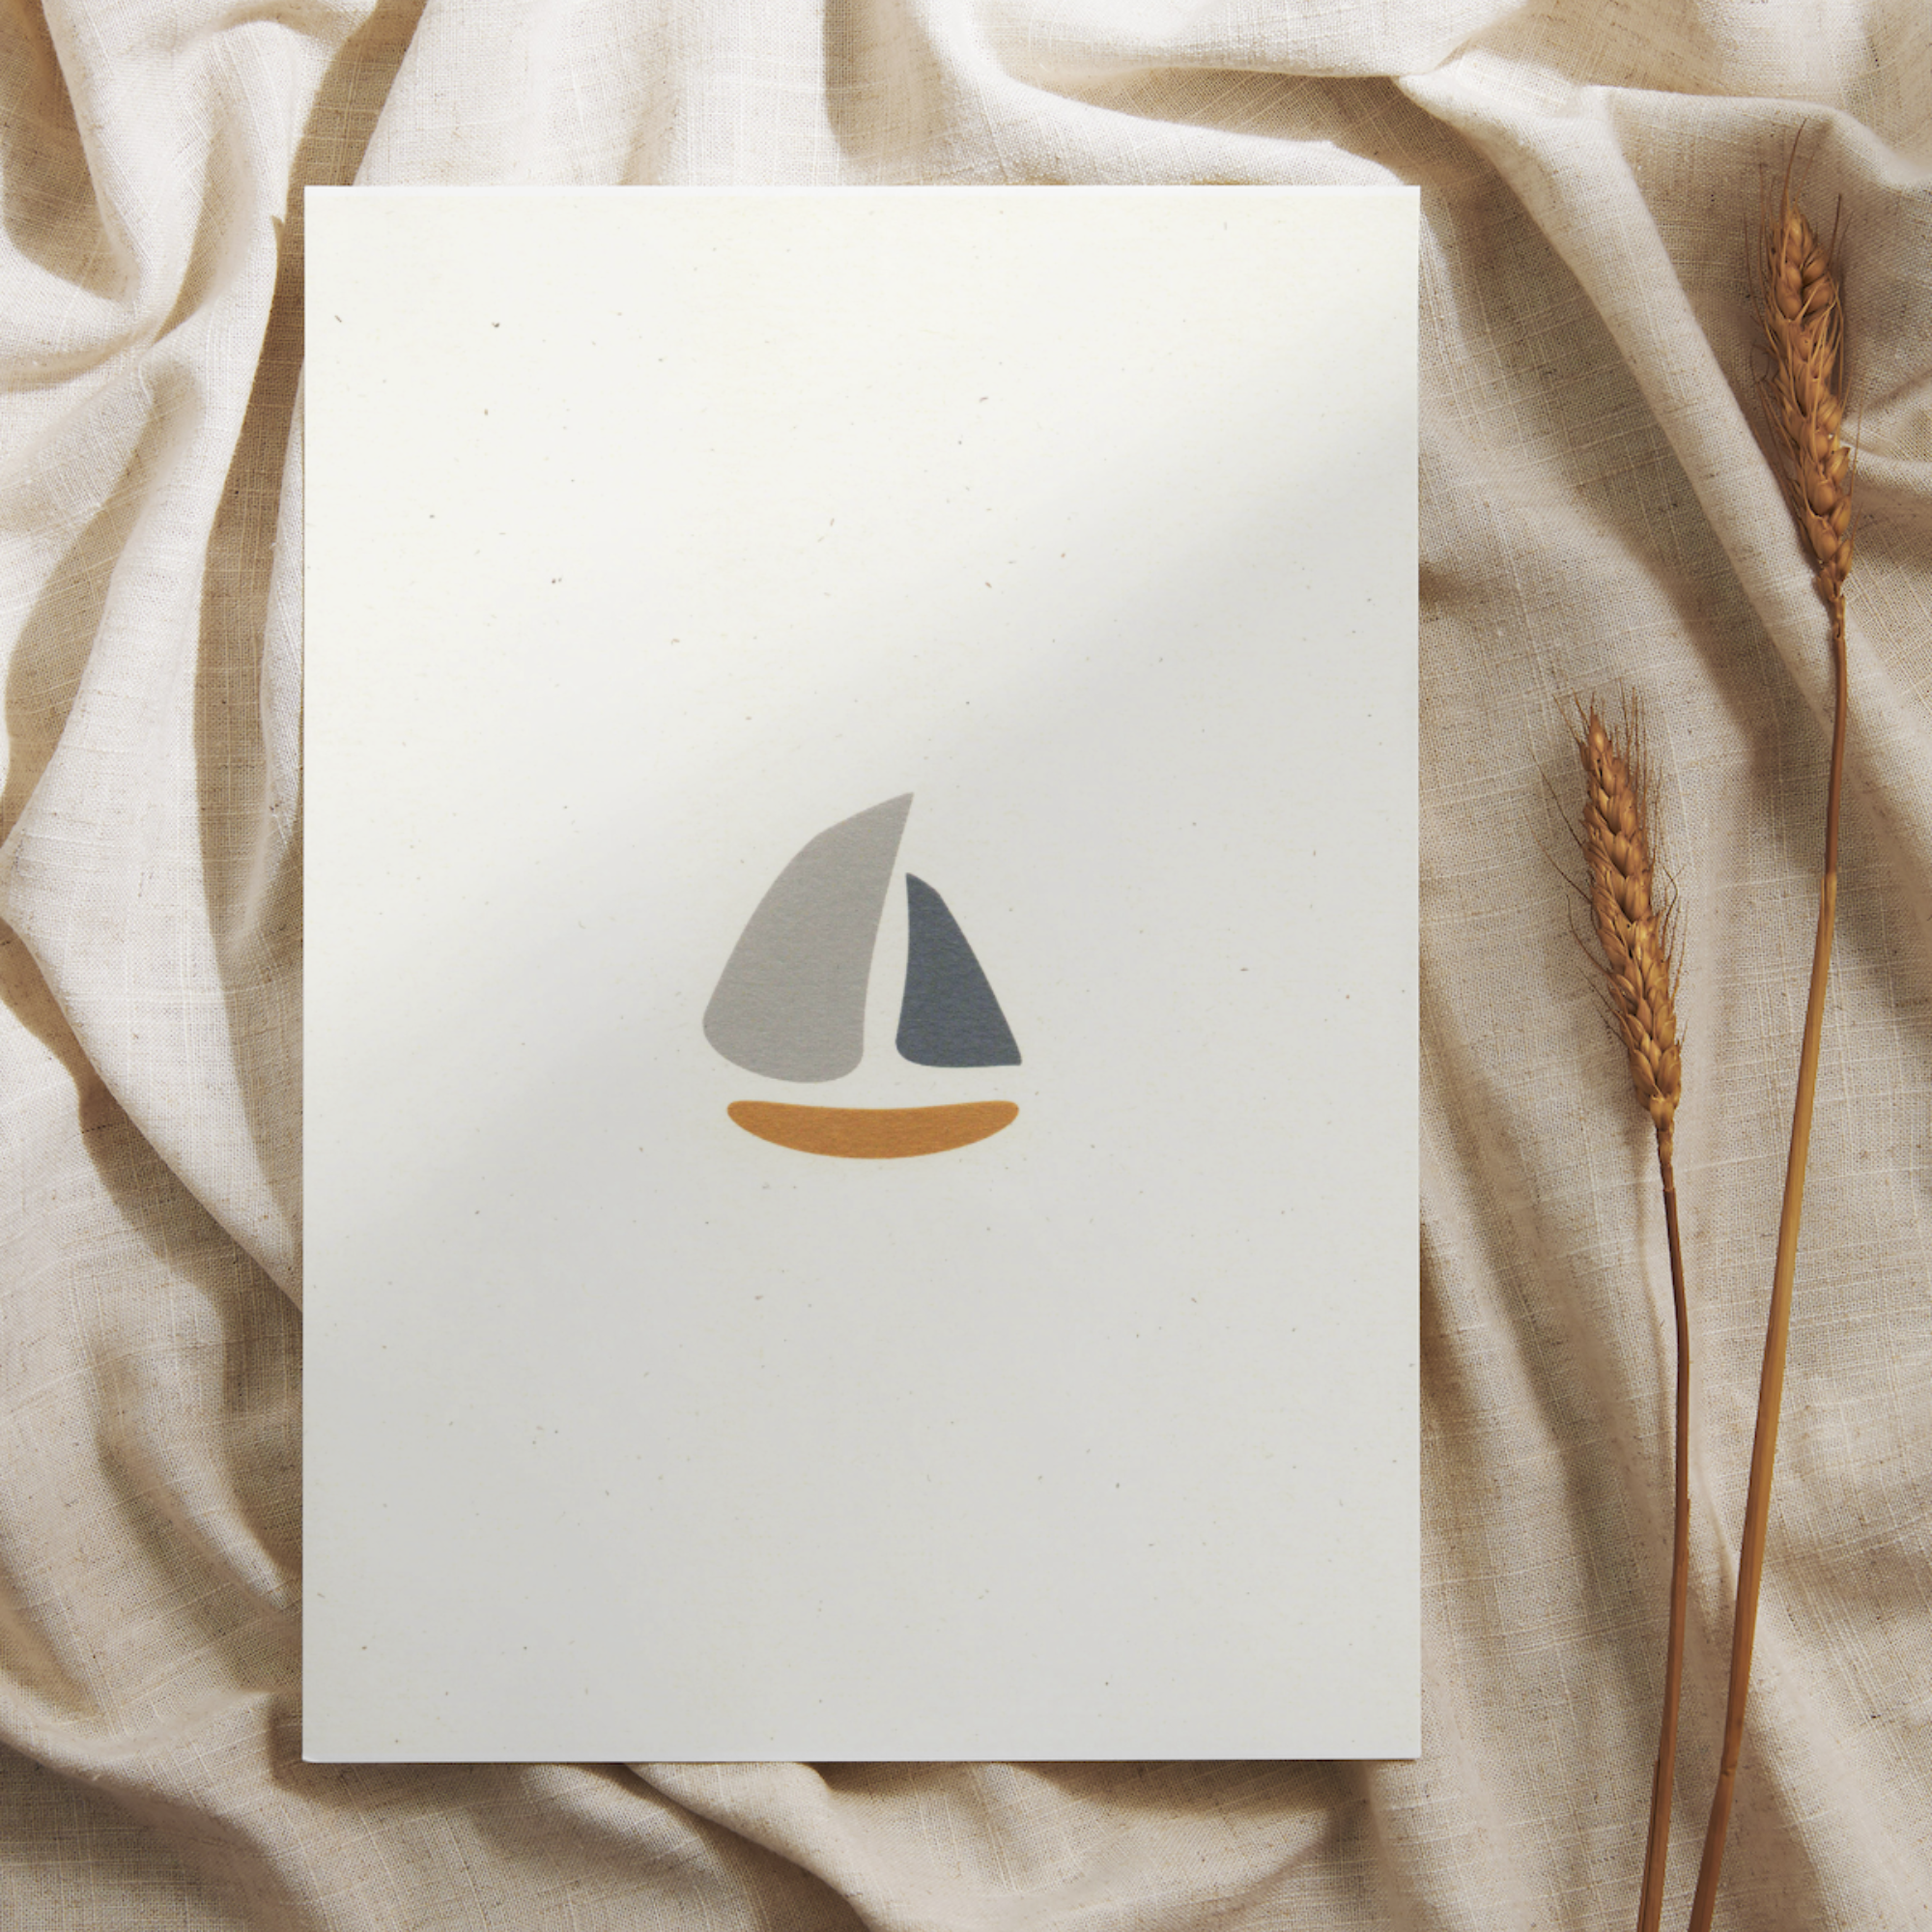 A cute nursery print of a schooner or small sailboat on recycled, natural paper, set on a backdrop of natural linen and wheat.